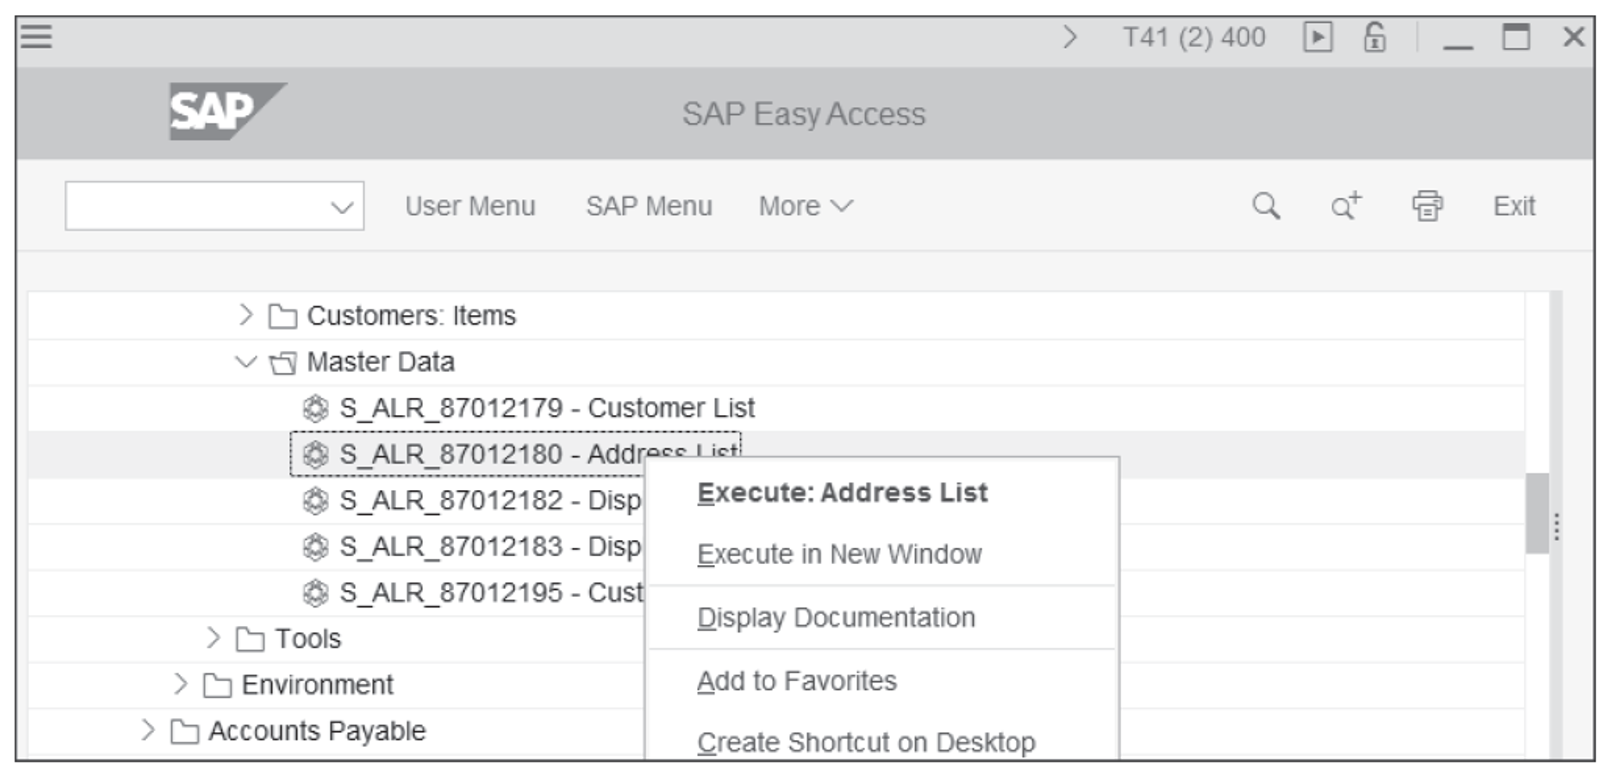 Context Menu for the Transaction Entry in the SAP Menu